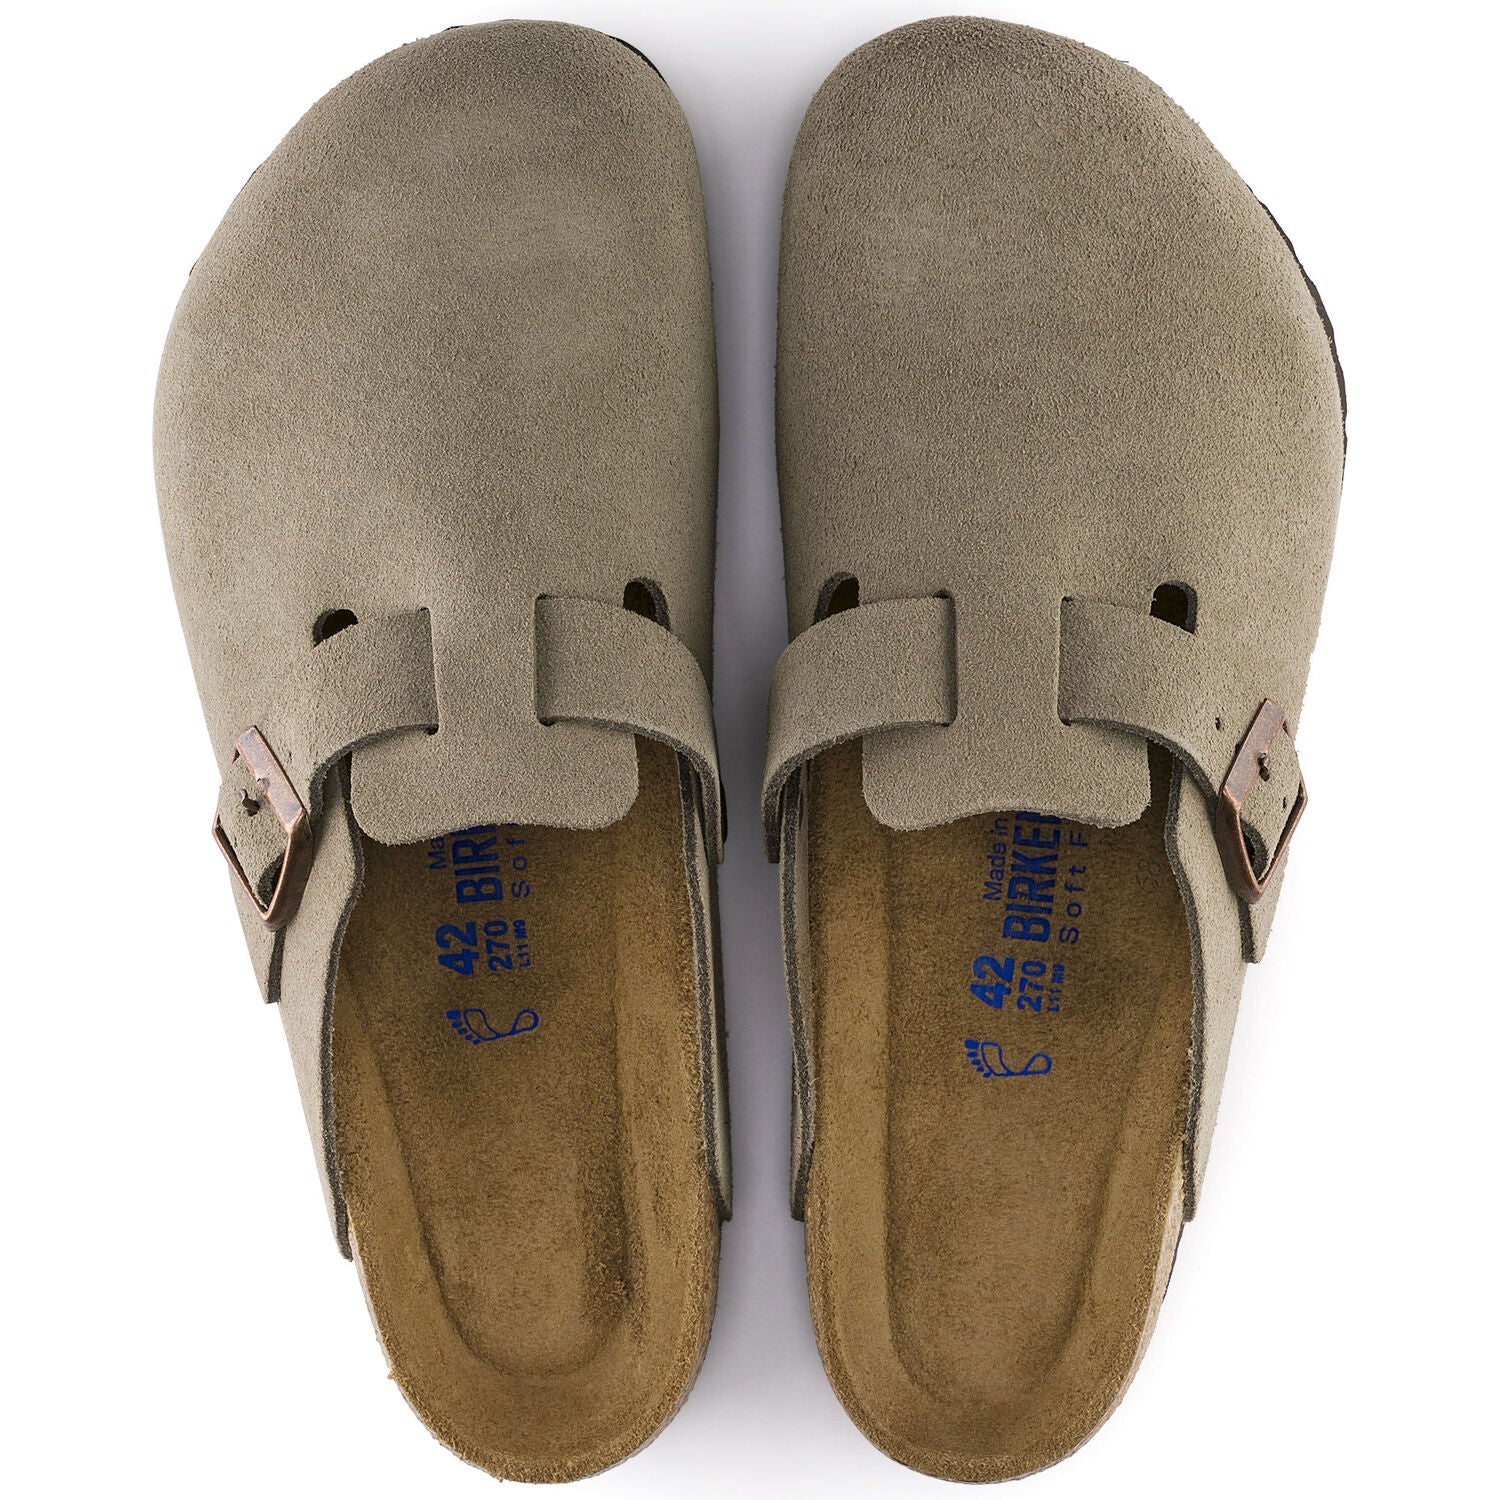 Boston Soft Footbed - The Birkenstock Clog in Taupe